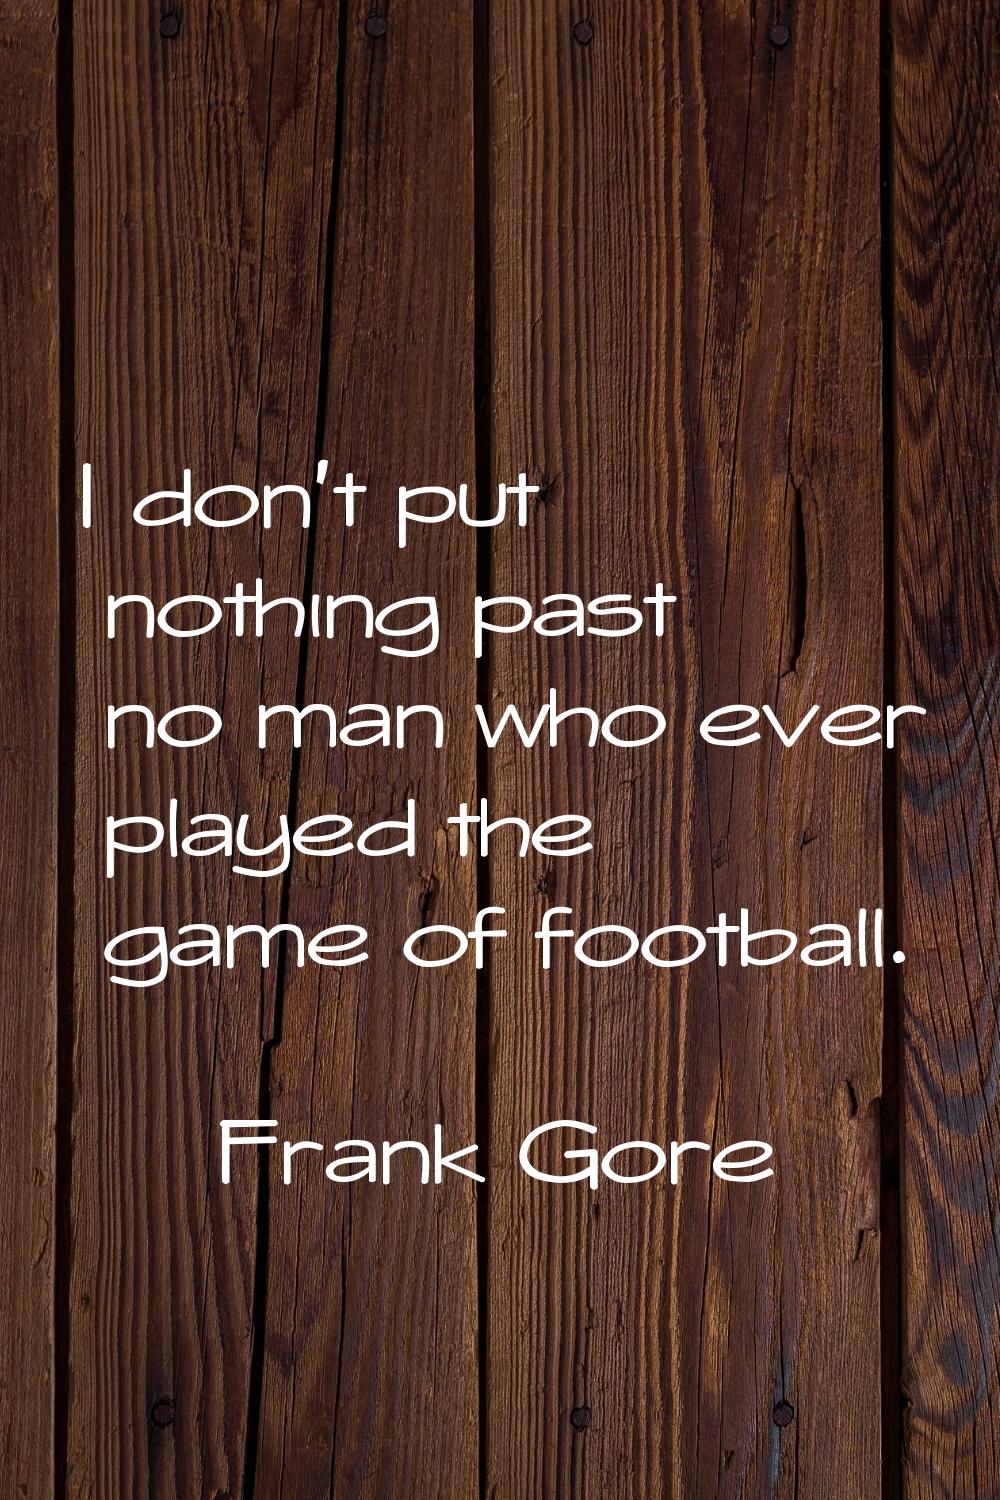 I don't put nothing past no man who ever played the game of football.